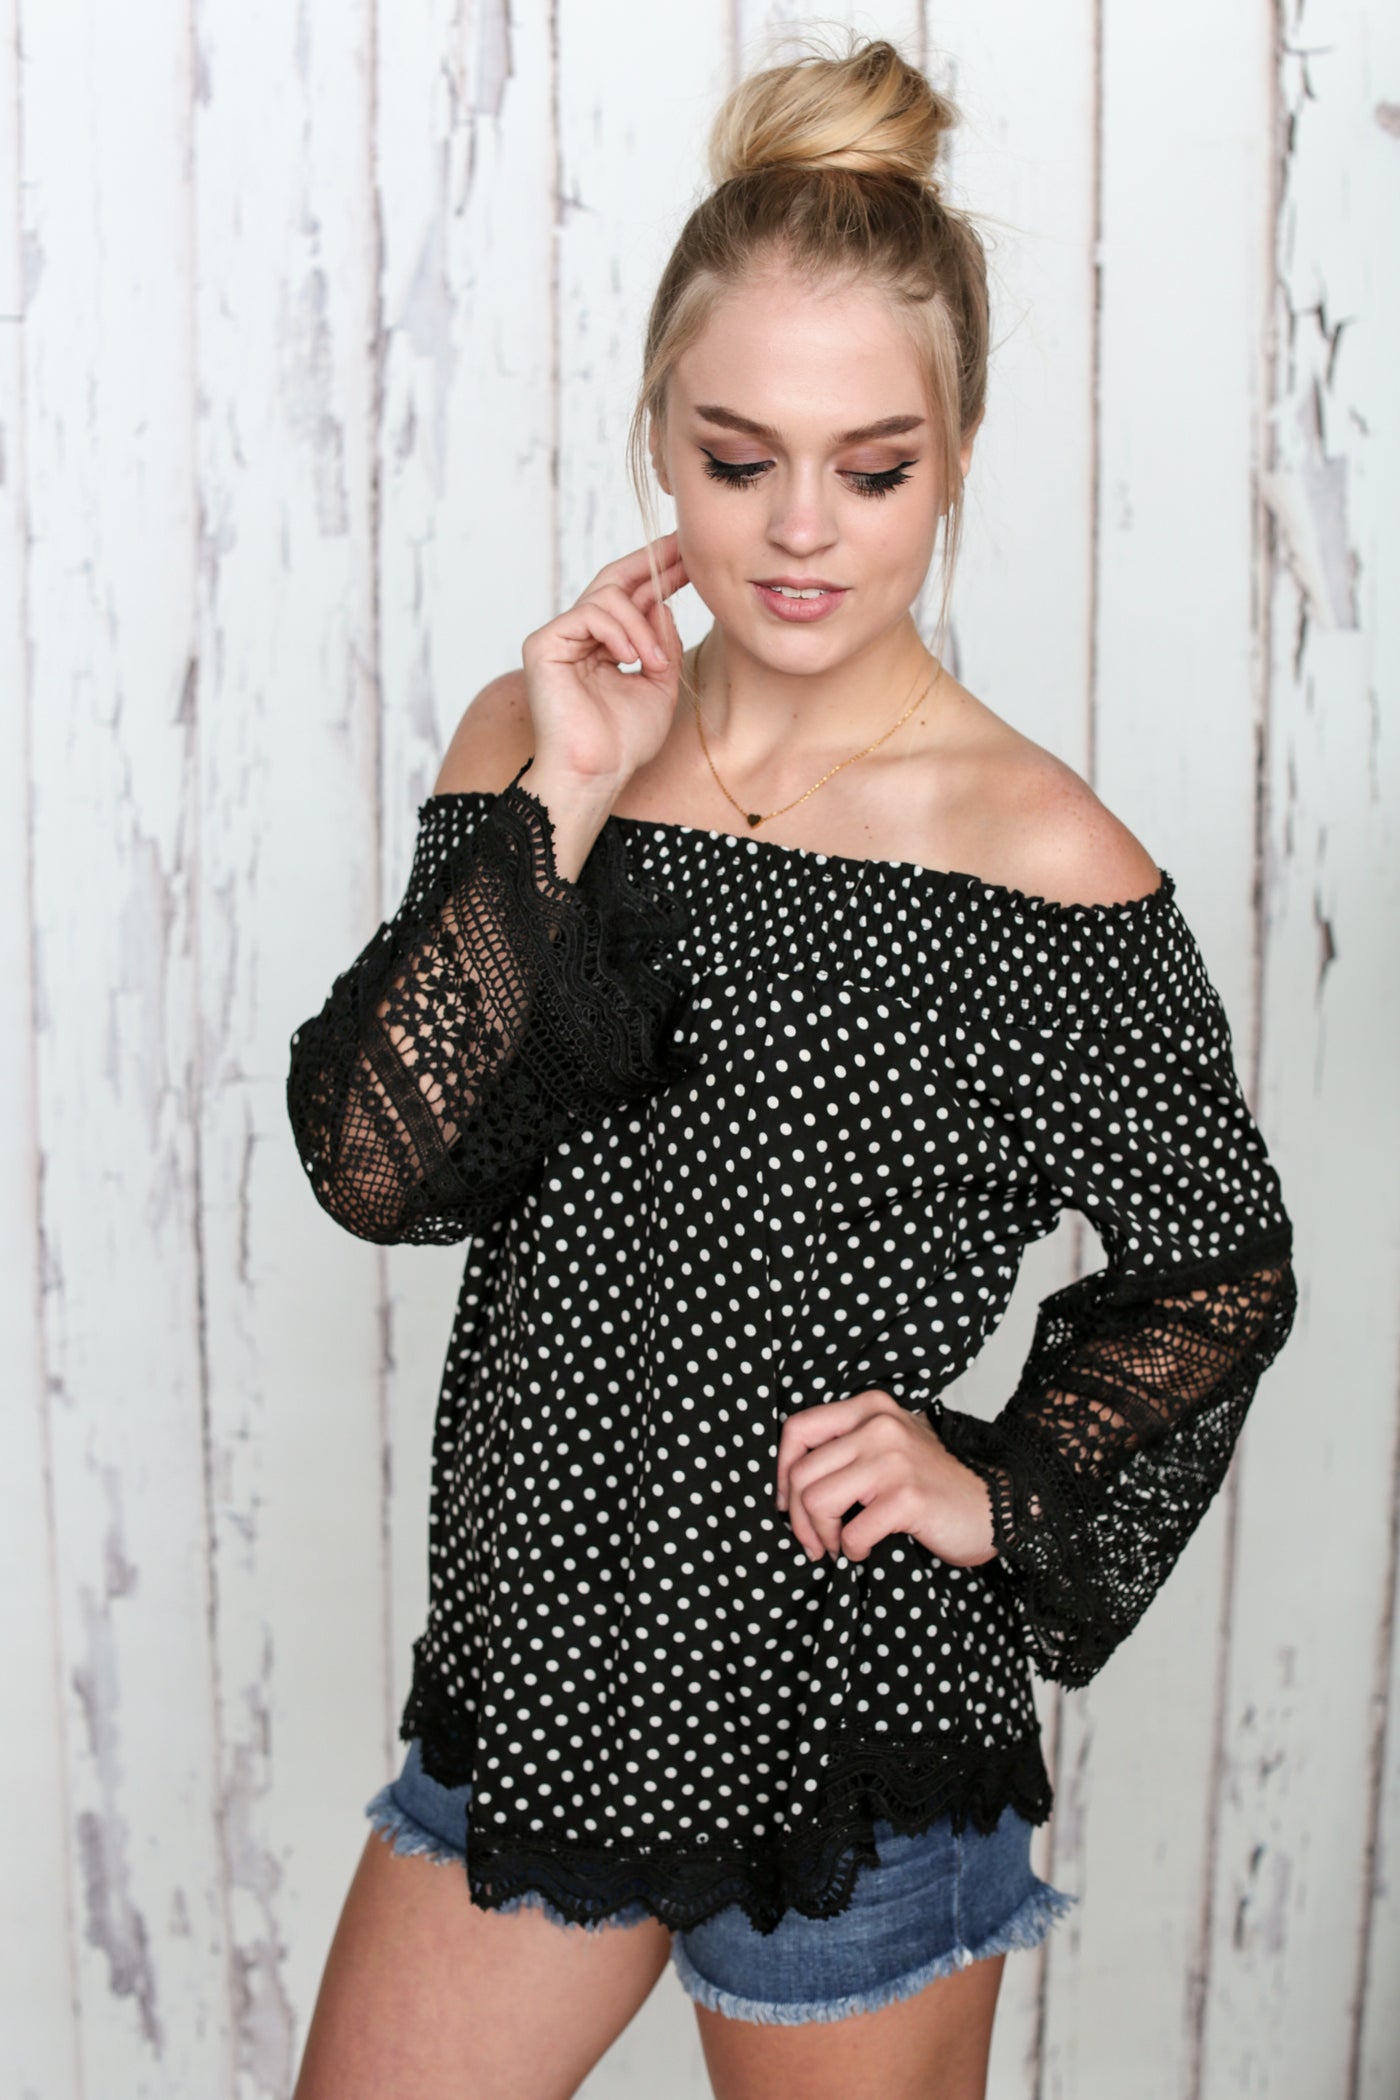 Polka Dots and Lace Top - Melissa Jean Boutique